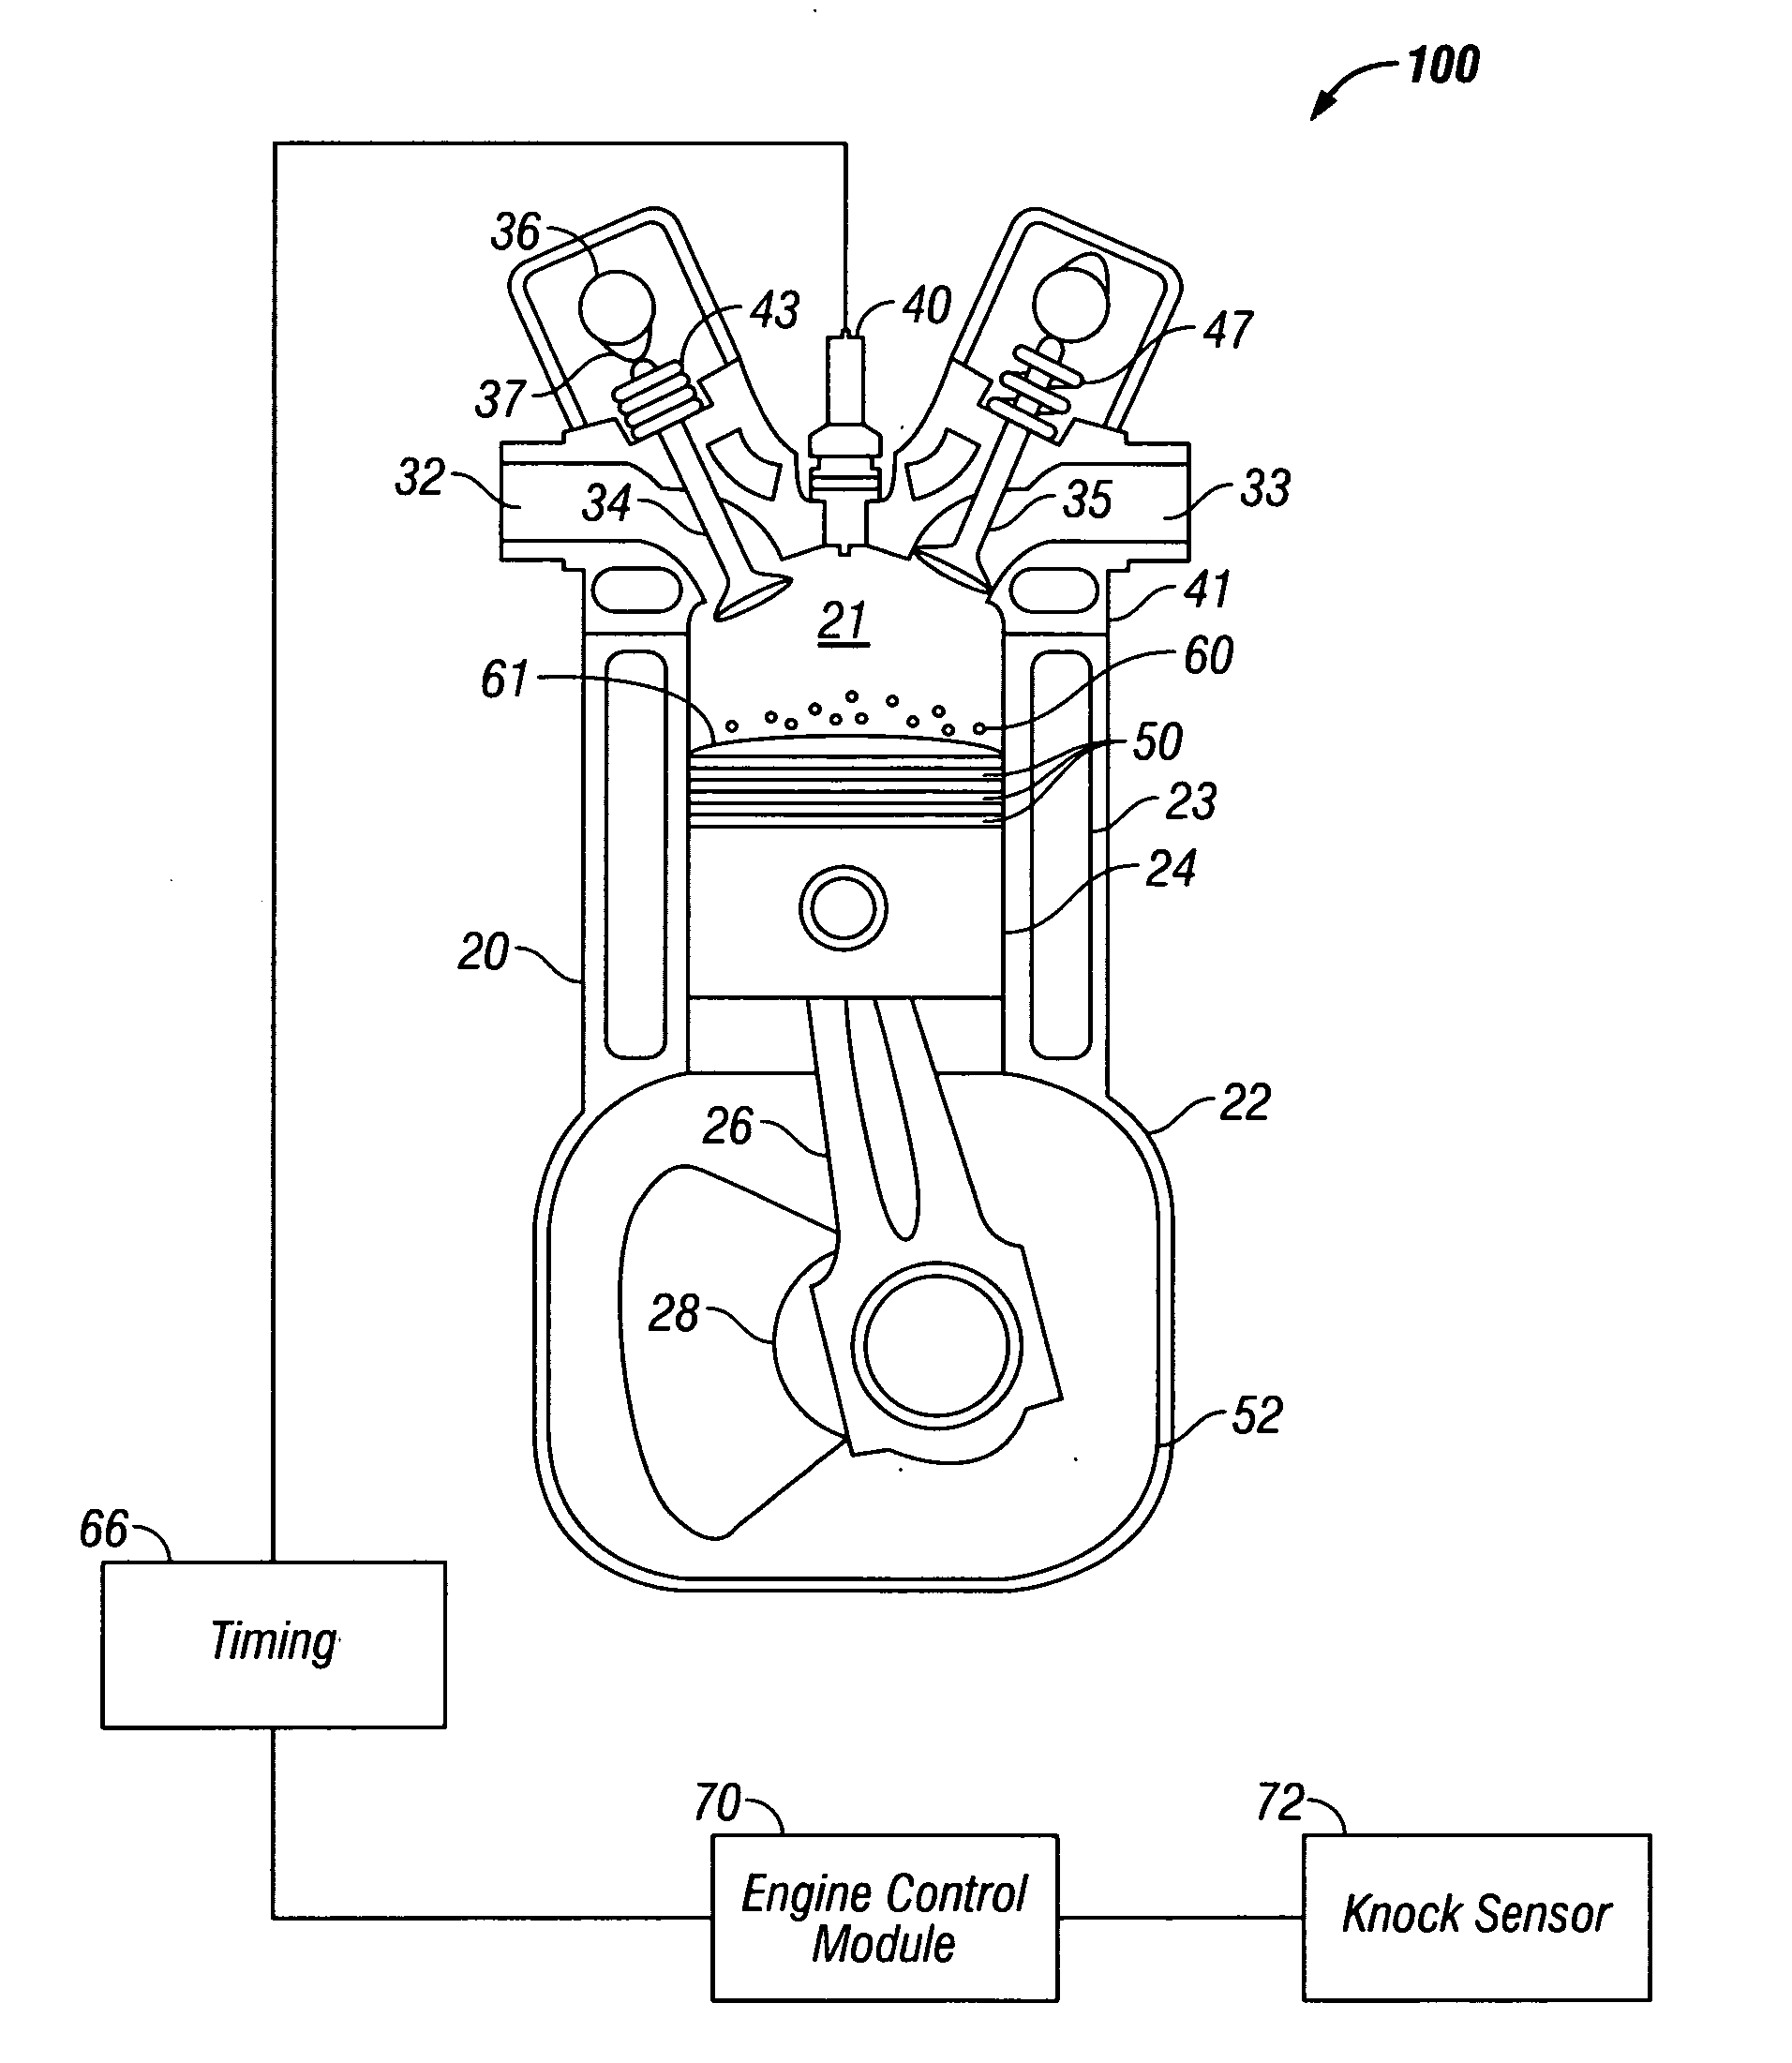 Method and related system of dithering spark timing to prevent pre-ignition in internal combustion engine